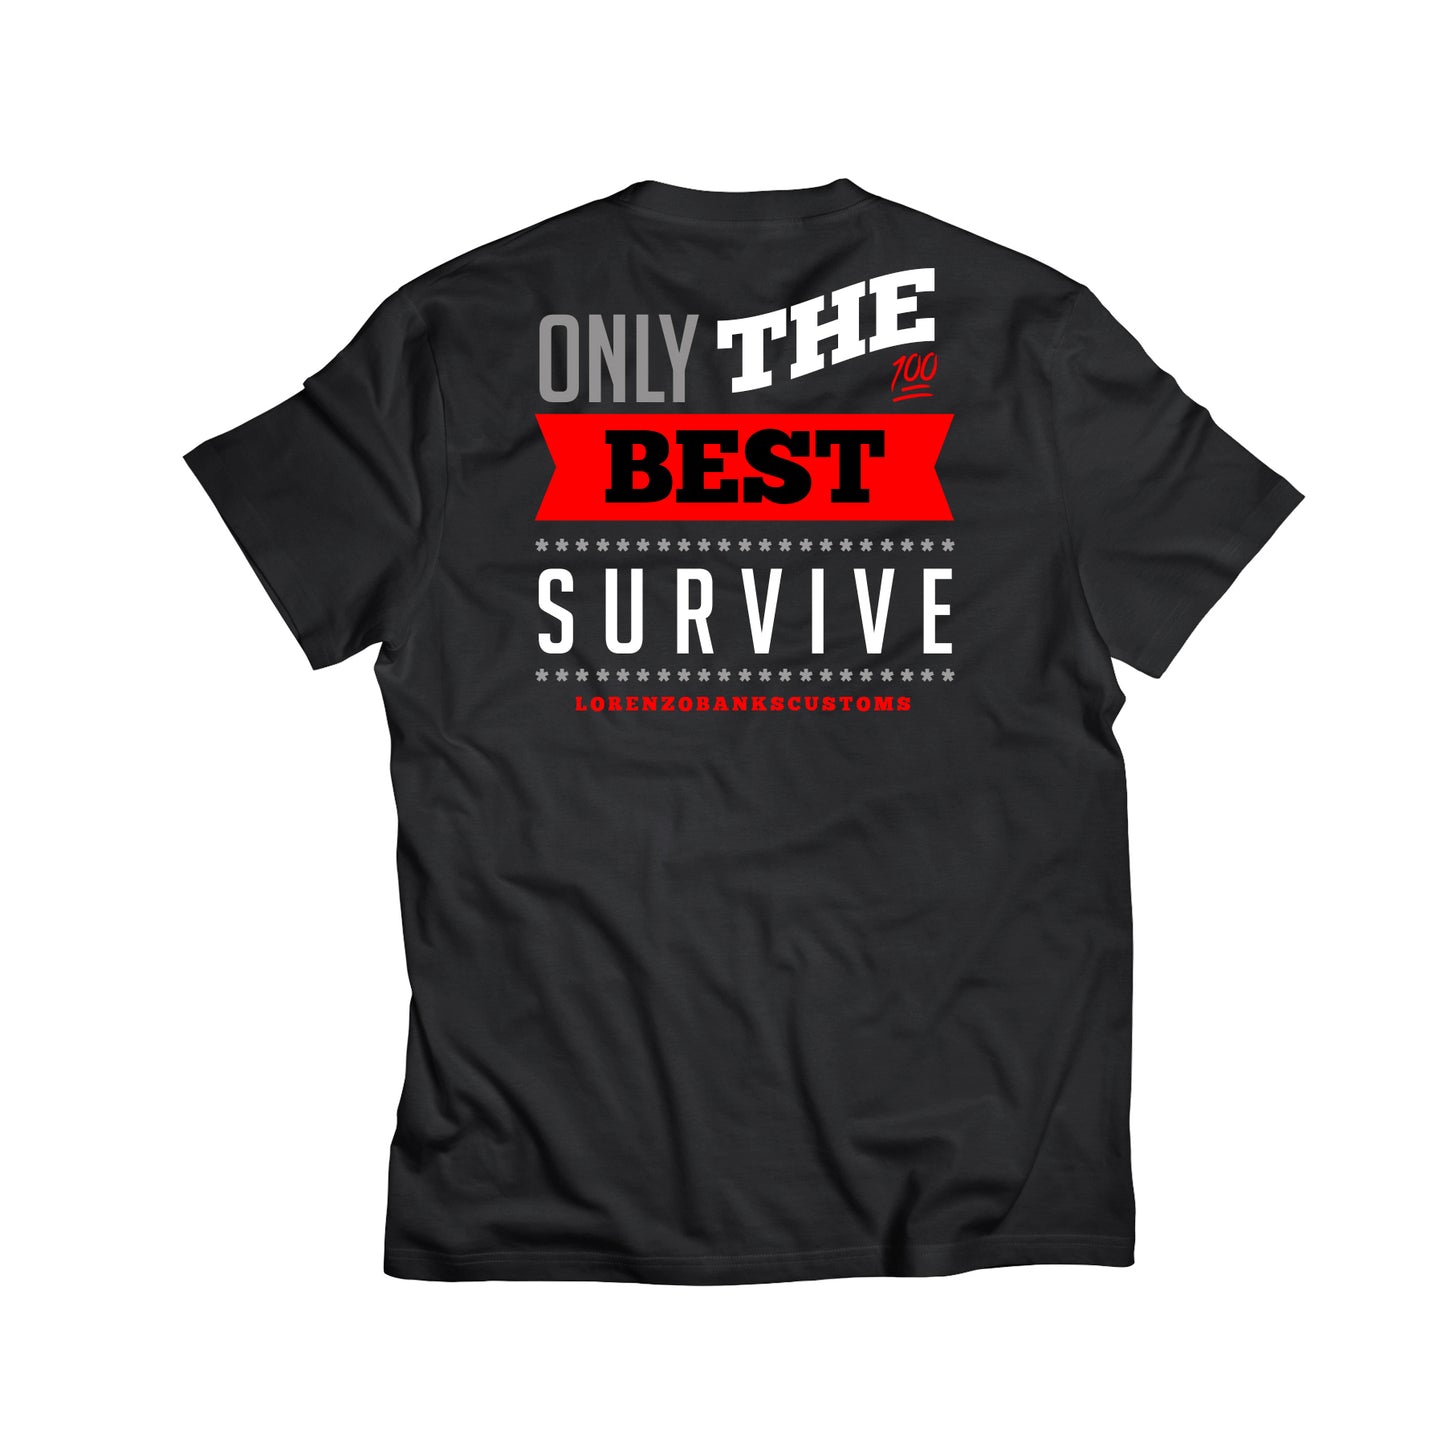 Only The Best Survive Tee